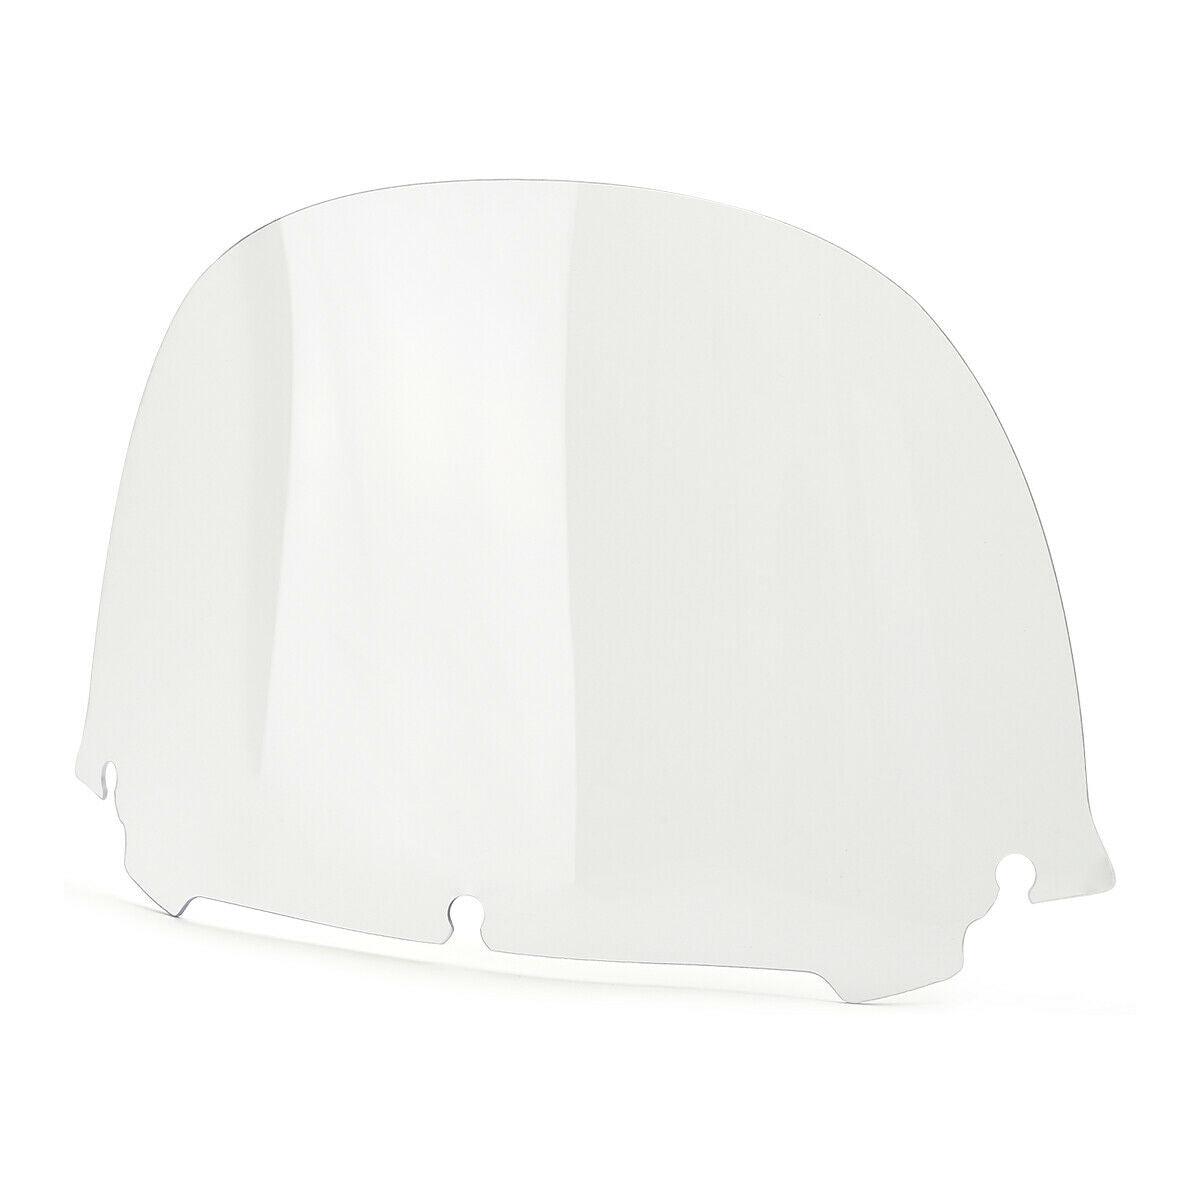 12.5" Clear Windshield Windscreen Fit For Harley Electra Glide Trike 2014-2021 - Moto Life Products